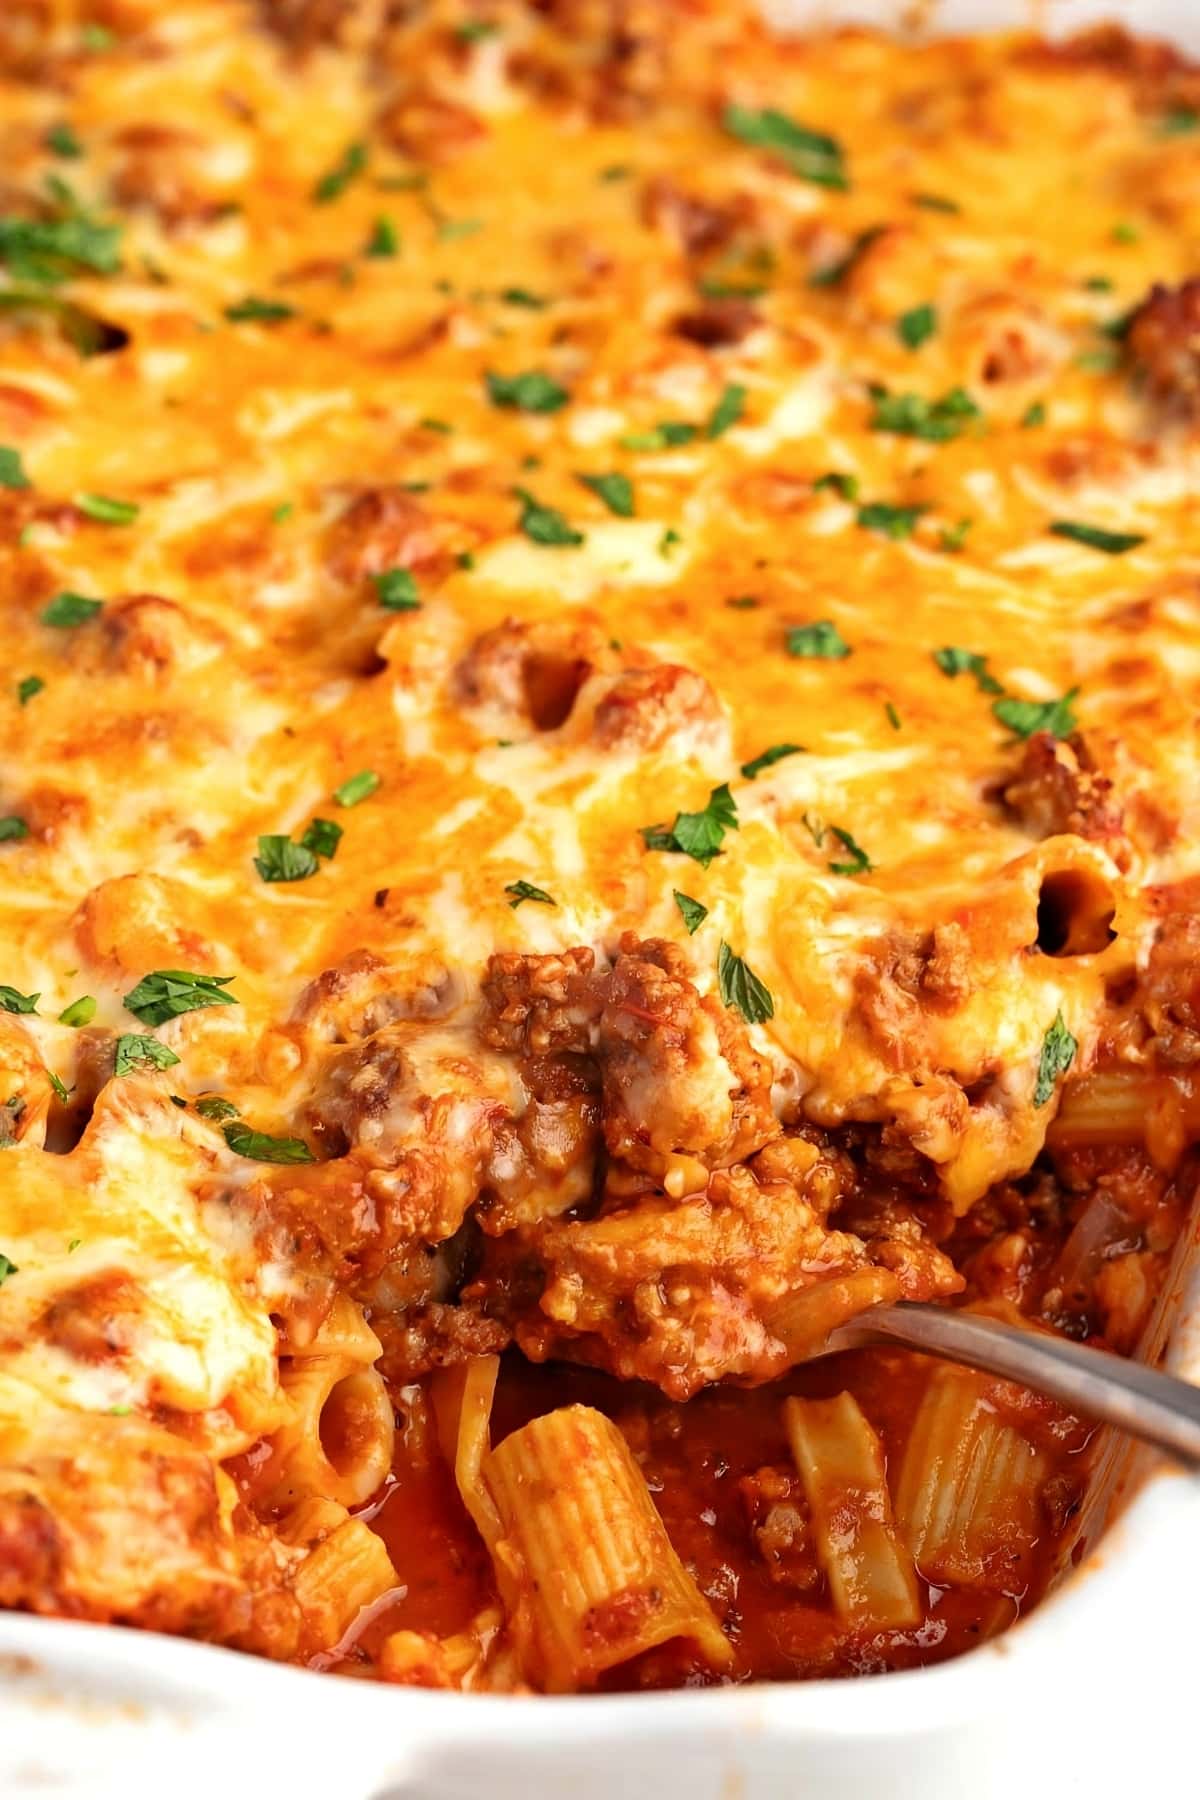 Cheesy and Meaty Baked Rigatoni Pasta with Ground Beef and Cheese